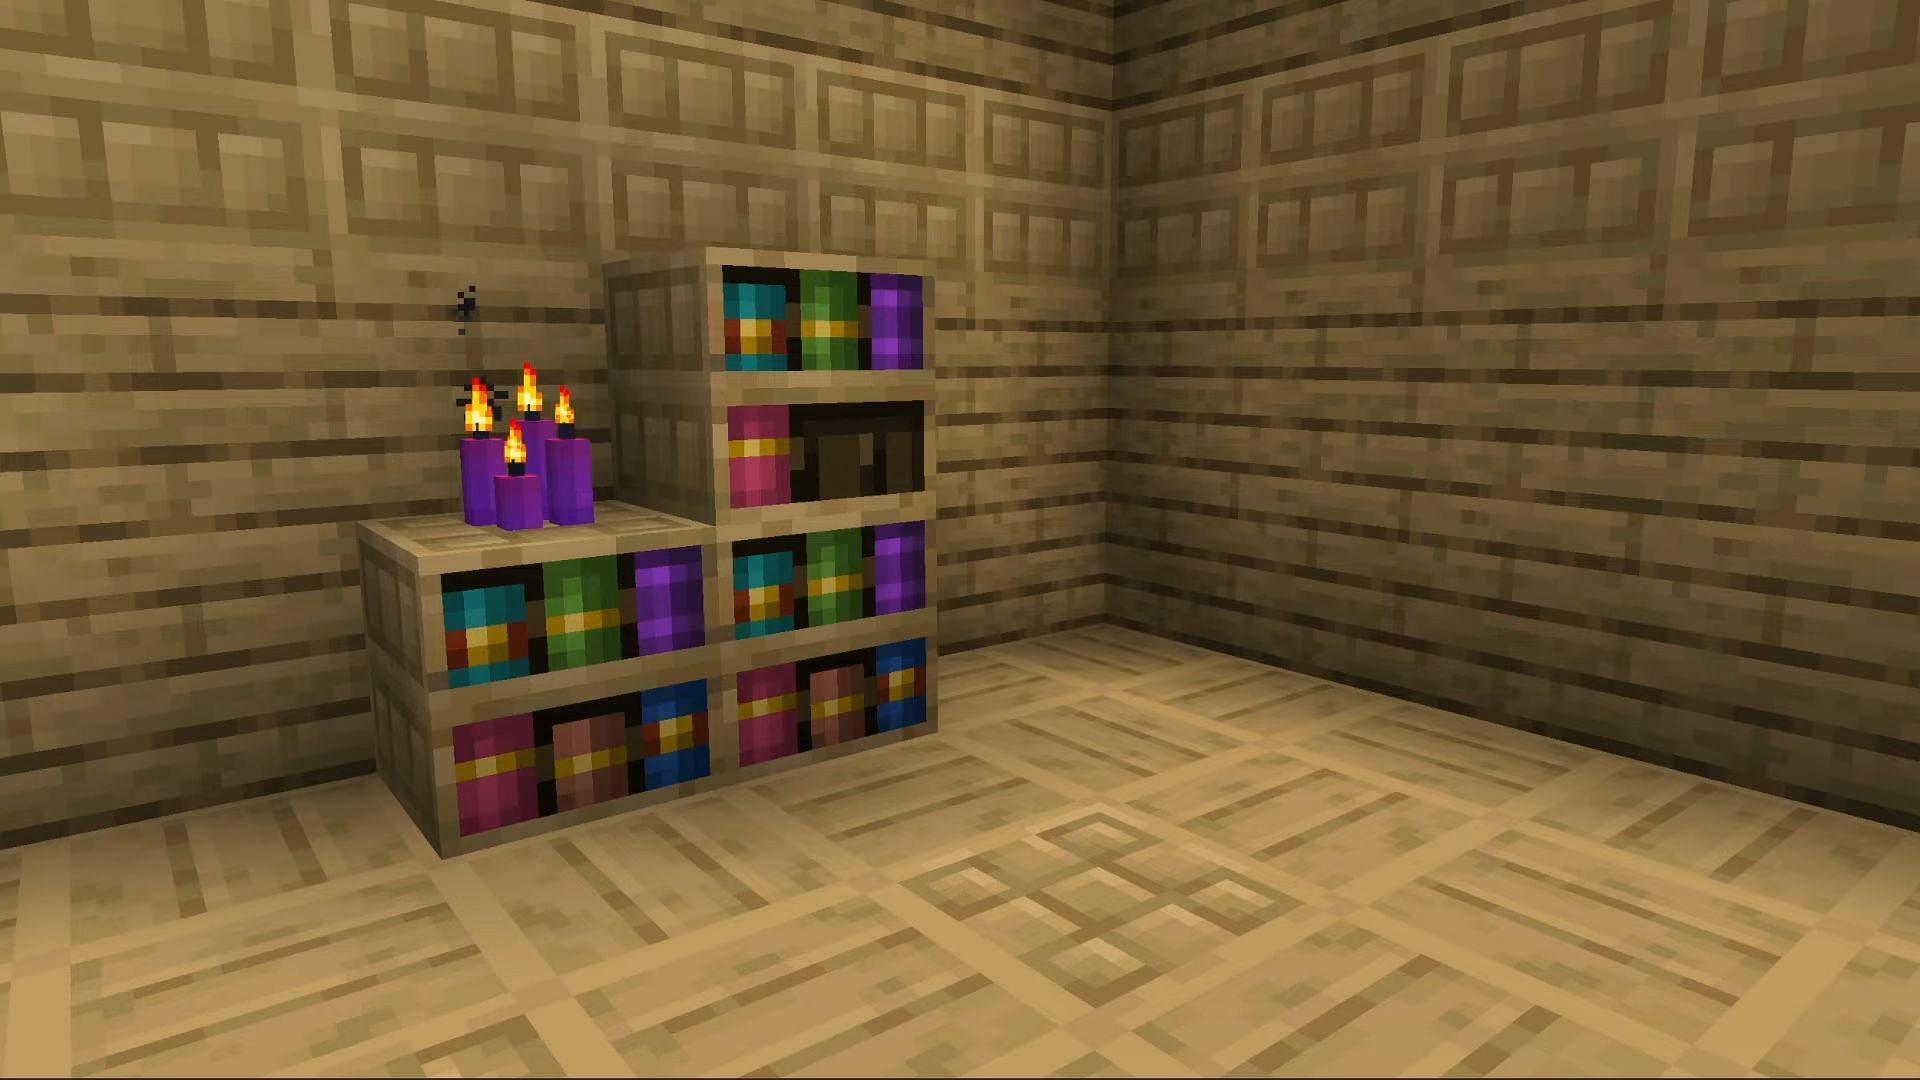 The chiseled bookshelf block will be released in the game with the 1.20 update (Image via Mojang)